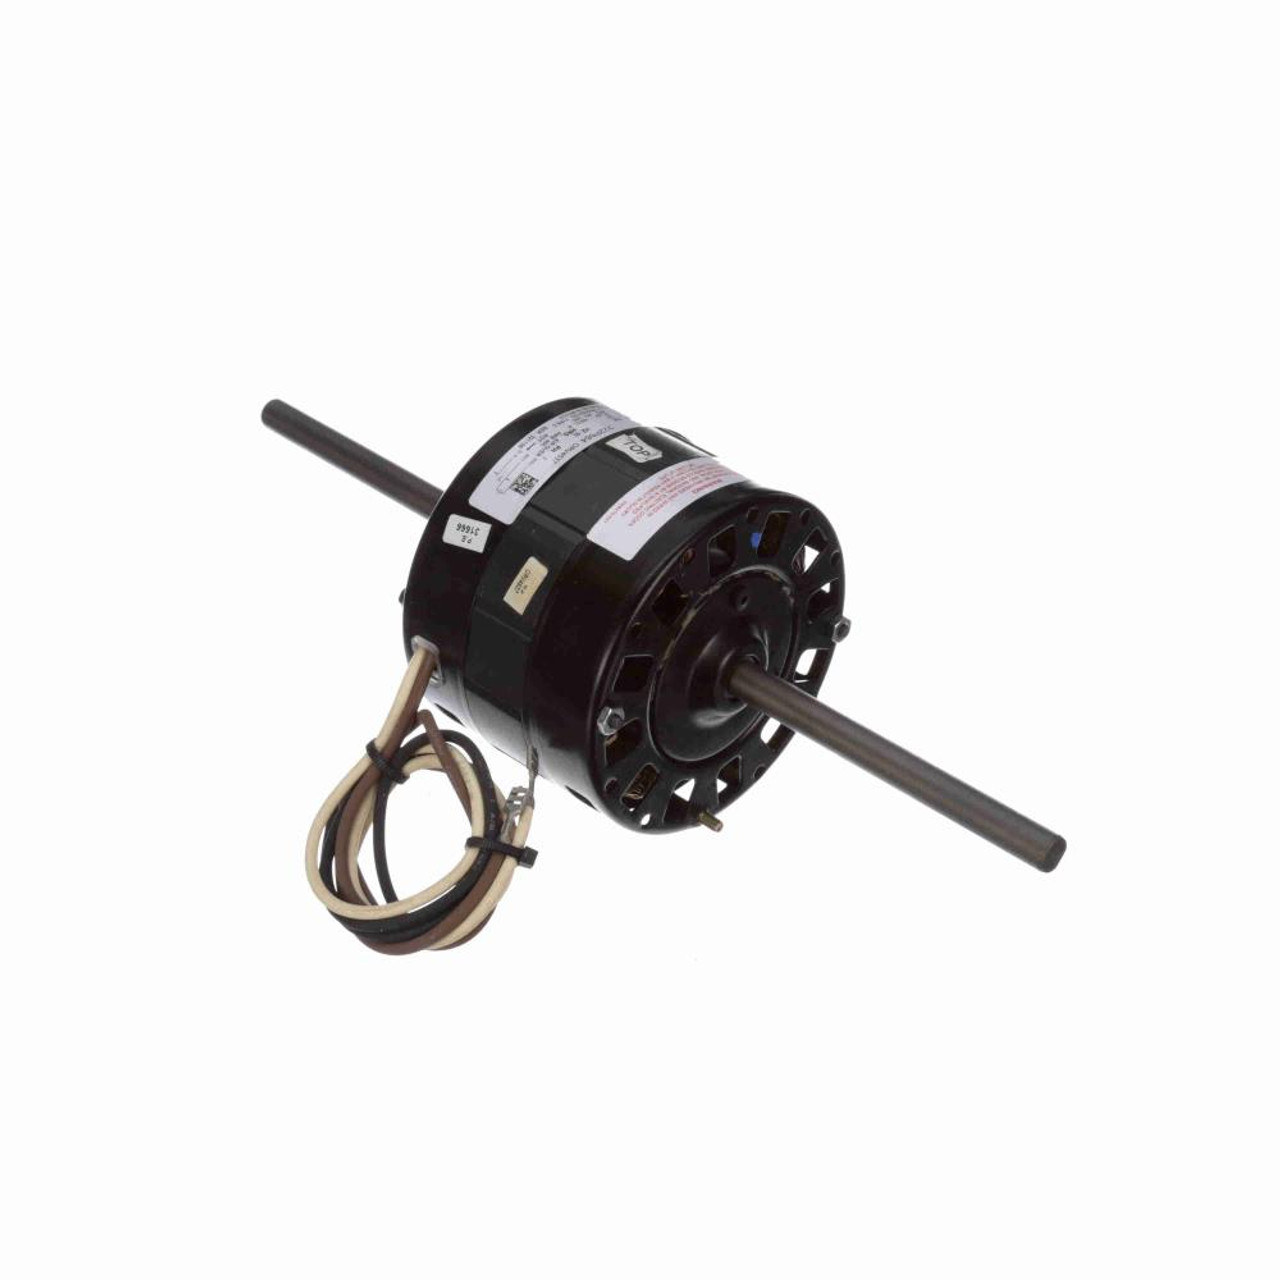 E-ORV4537 (Opened Box) 1/4 HP 115 Volt 1625 RPM 1-speed Coleman (6747A311) RV Air Conditioner Motor